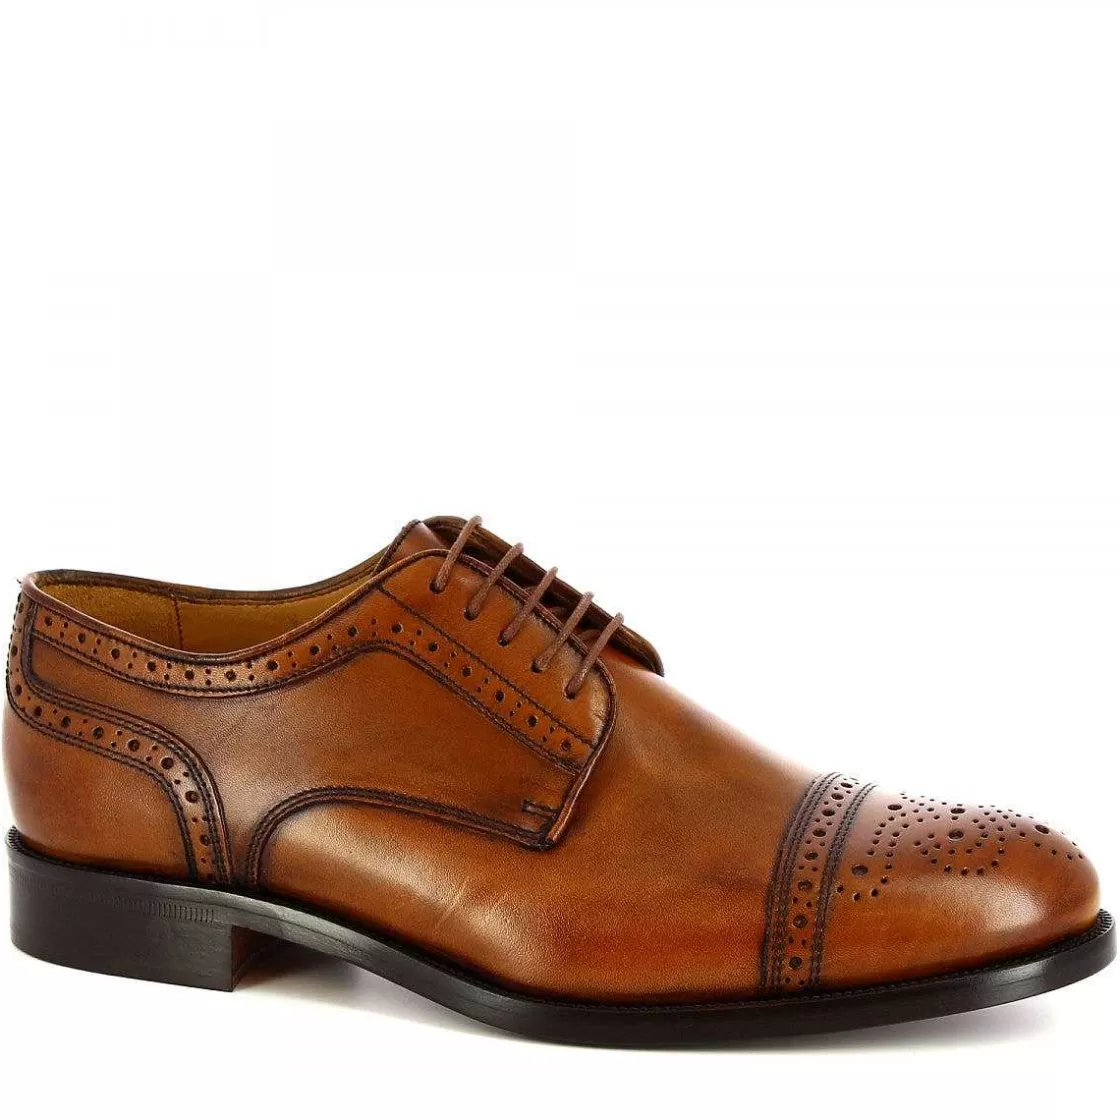 Leonardo Men'S Handmade Oxford Brogues In Leather Calf Leather With Tip New